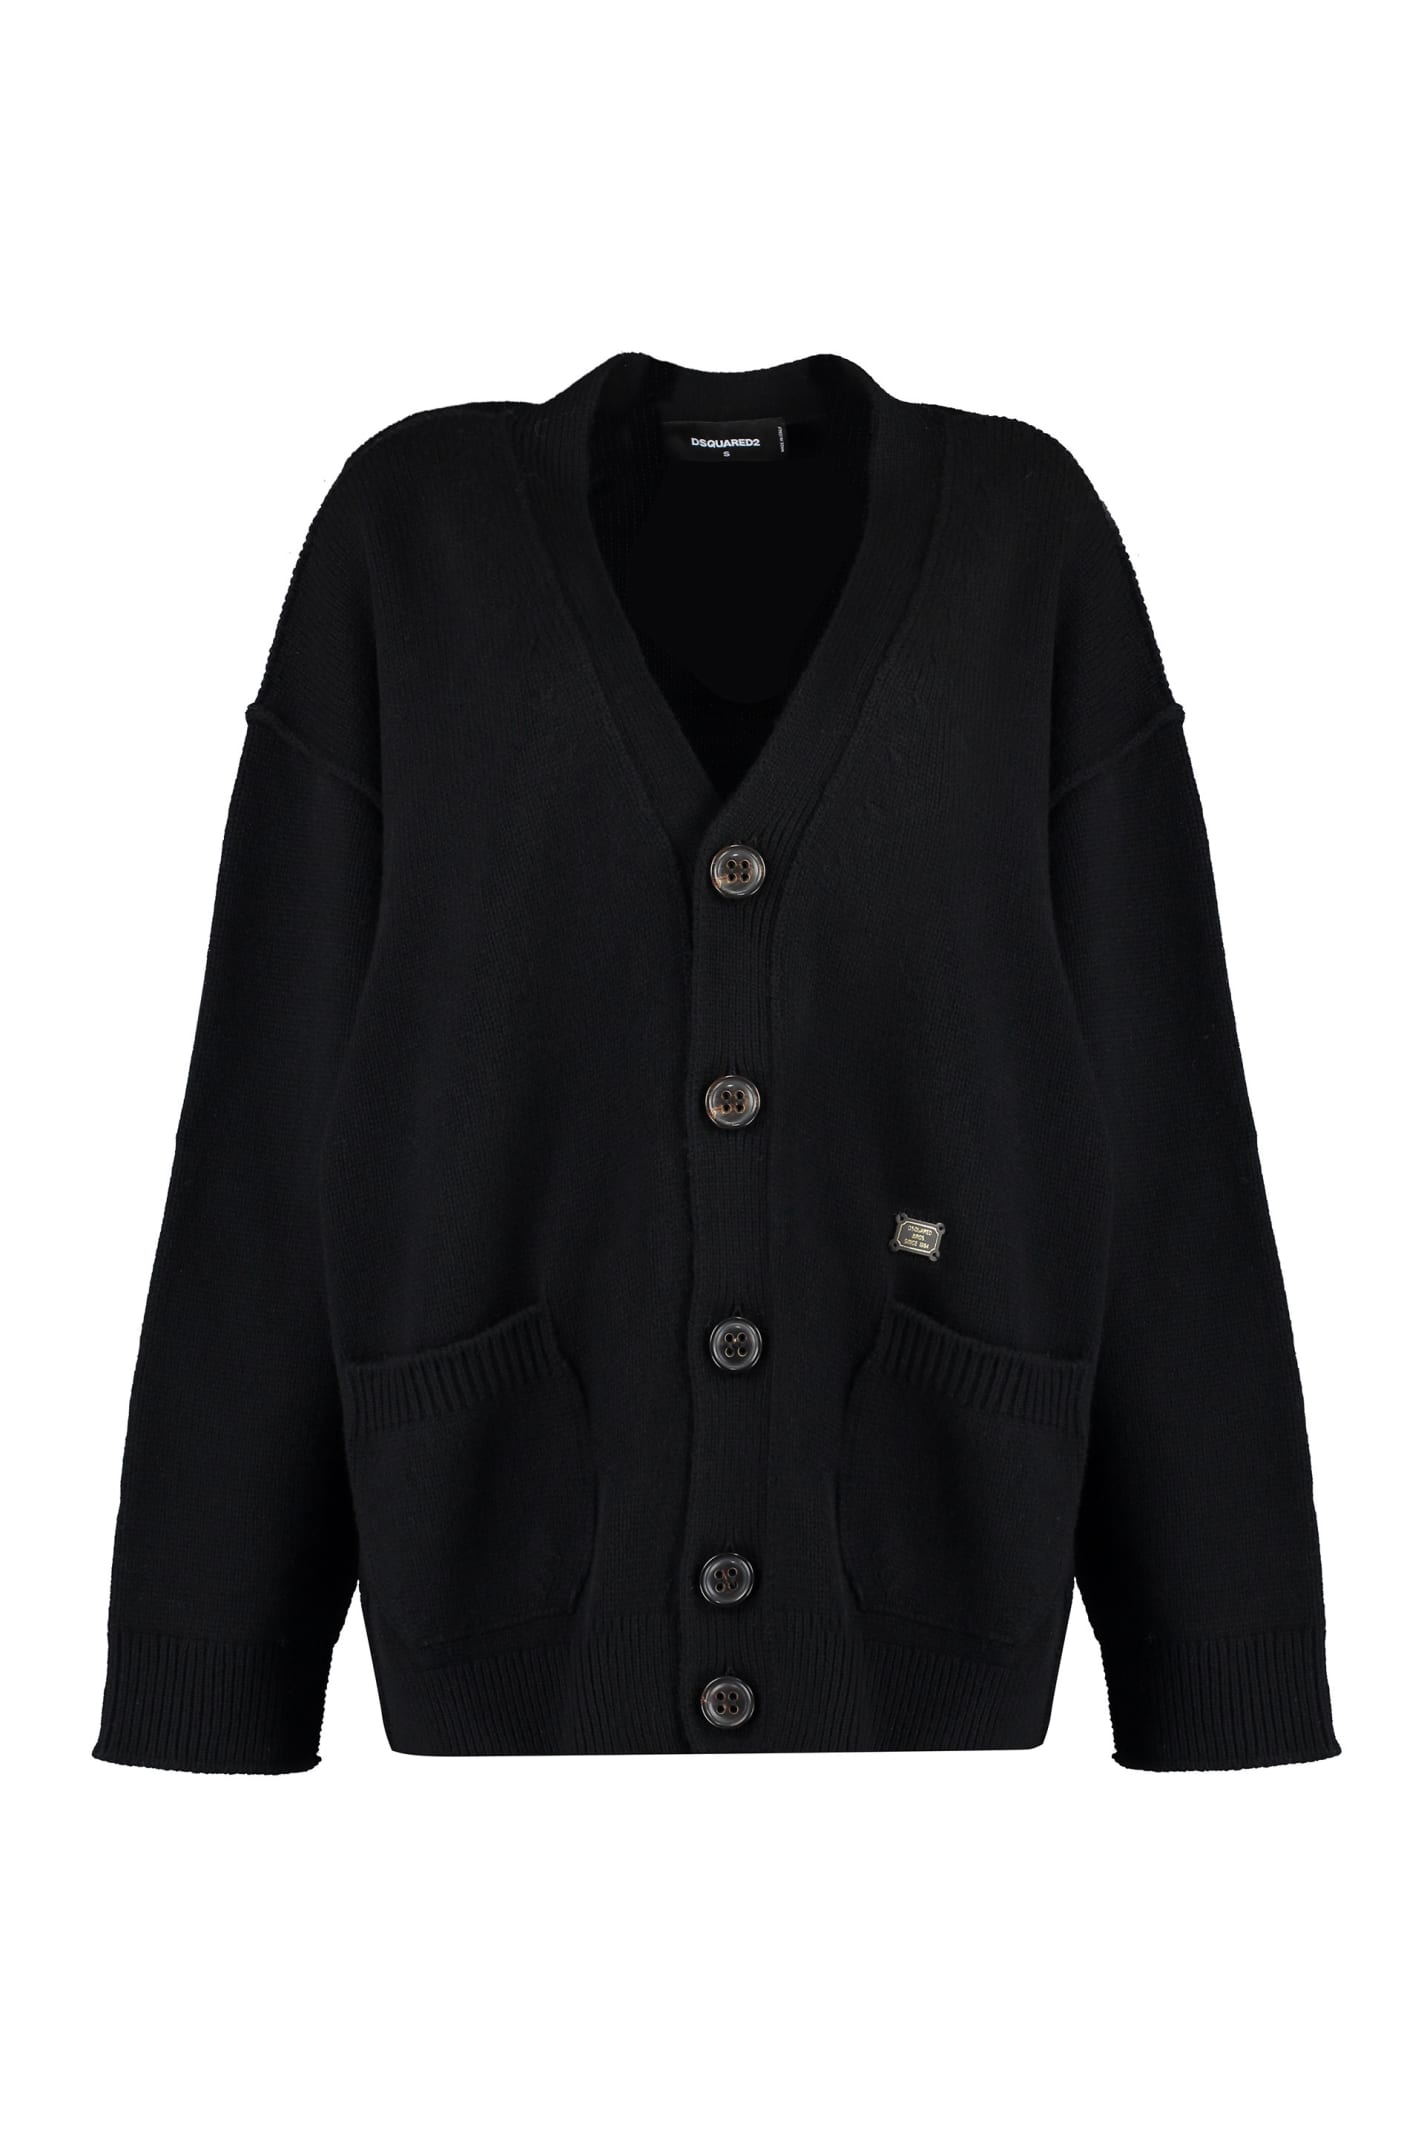 DSQUARED2 WOOL AND CASHMERE CARDIGAN